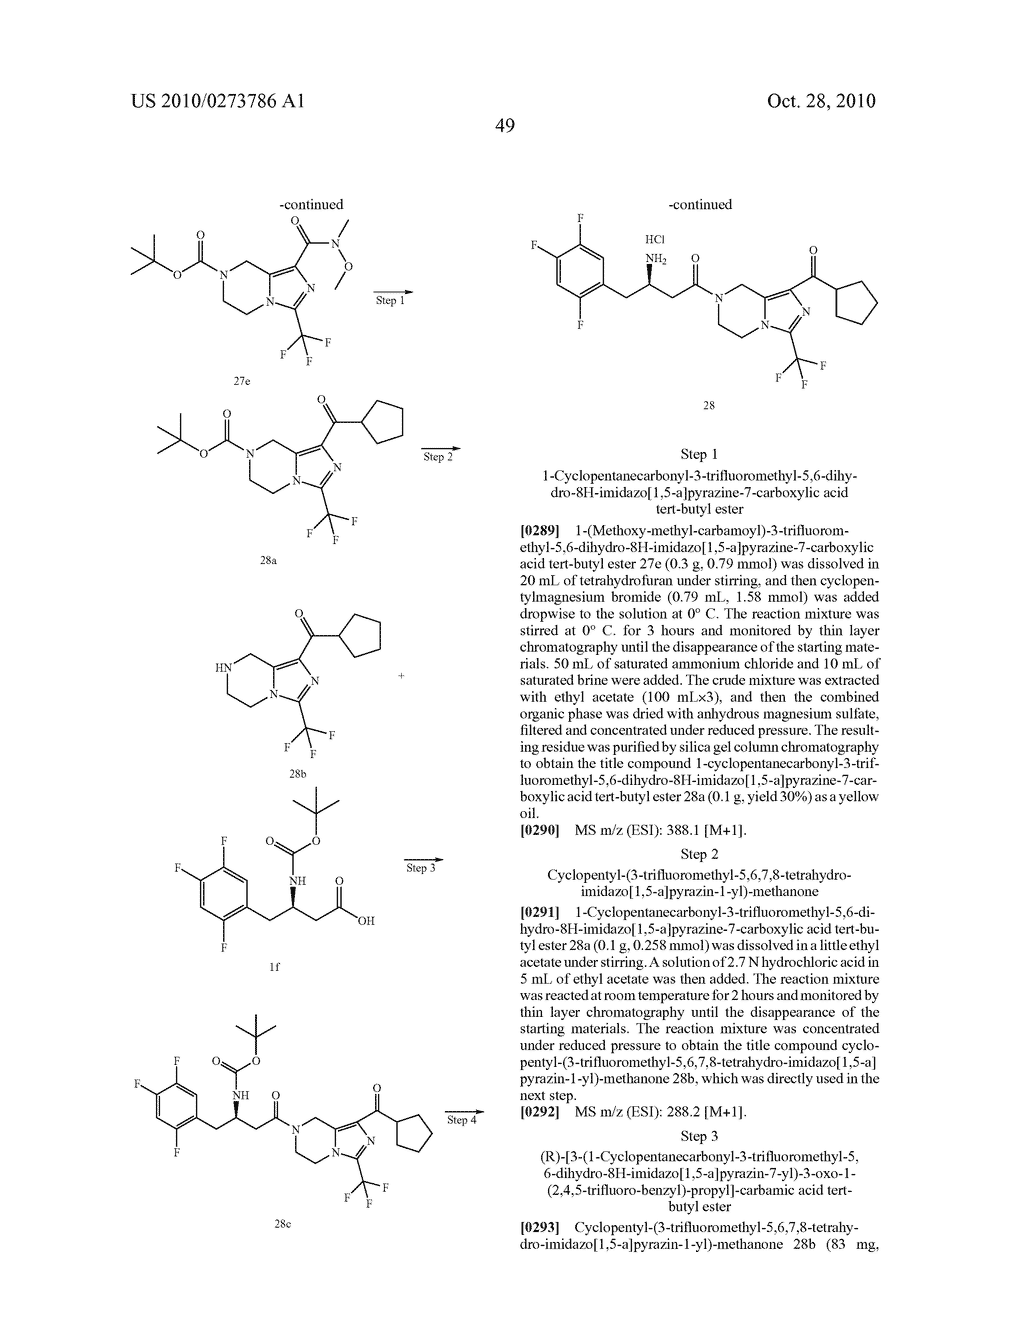 TETRAHYDRO-IMIDAZ0[1,5-A]PYRAZINE DERIVATIVES, PREPARATION PROCESS AND MEDICINAL USE THEREOF - diagram, schematic, and image 50